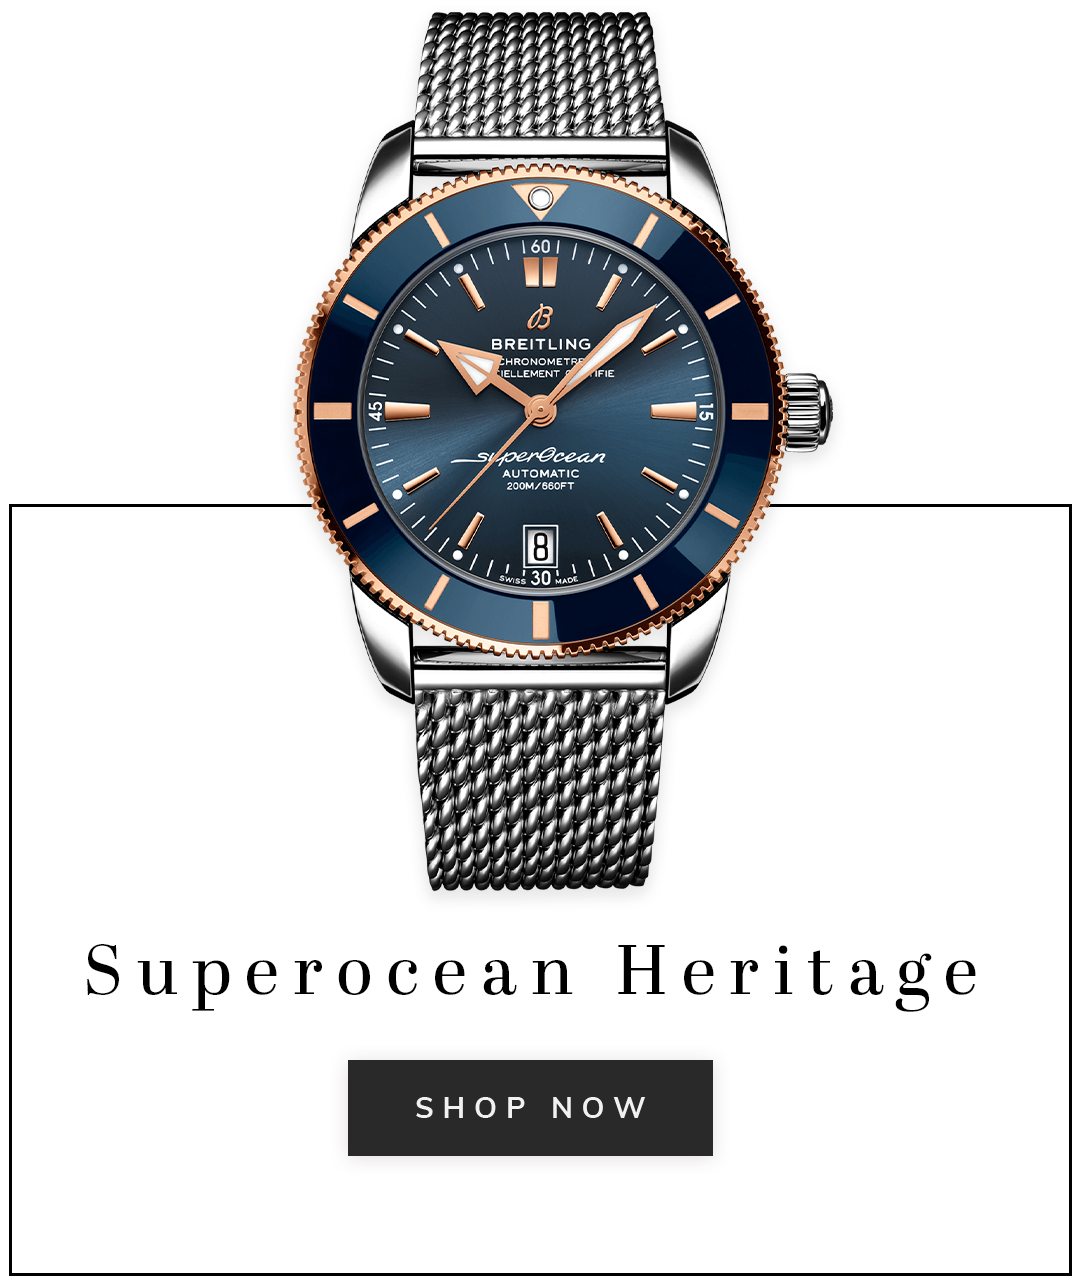 A Breitling Superocean Heritage watch with text shop now